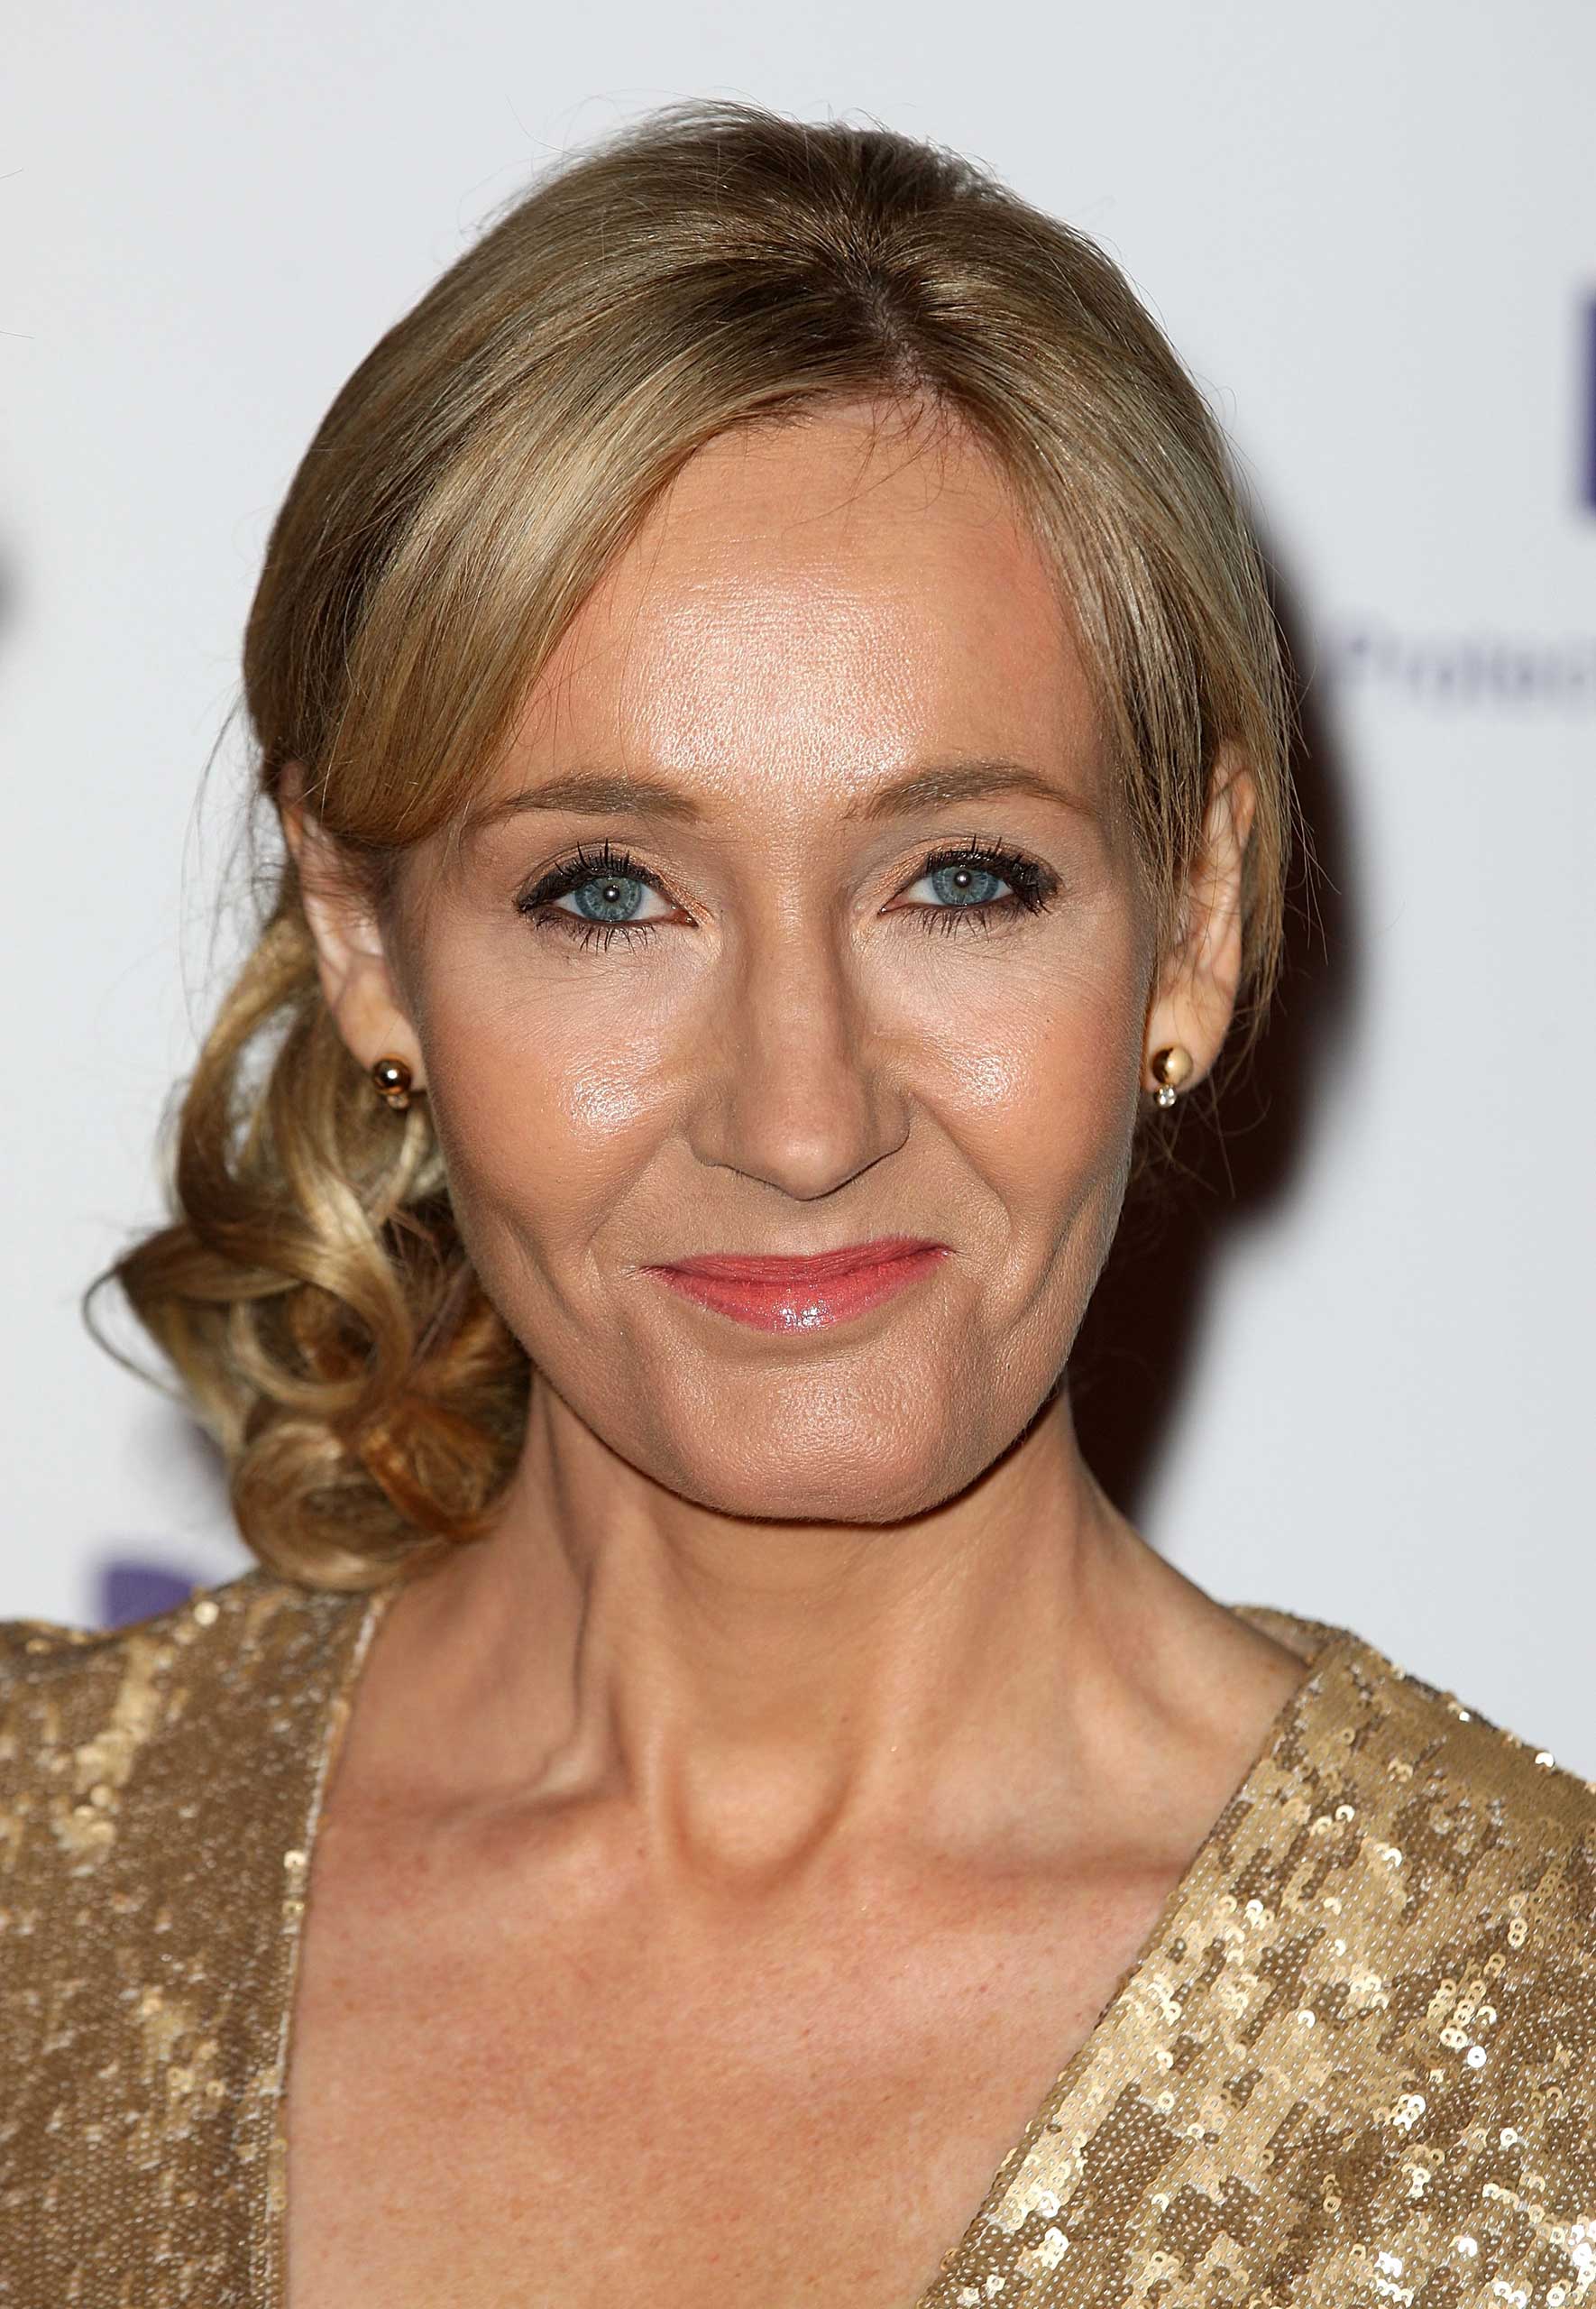 Joanne "JK" Rowling attends a charity evening hosted by herself to raise funds for 'Lumos' a charity helping to reunite children in care with their families in Eastern Europe at Warner Bros Studios in London on Nov. 9, 2013. (Danny E. Martindale—Getty Images)